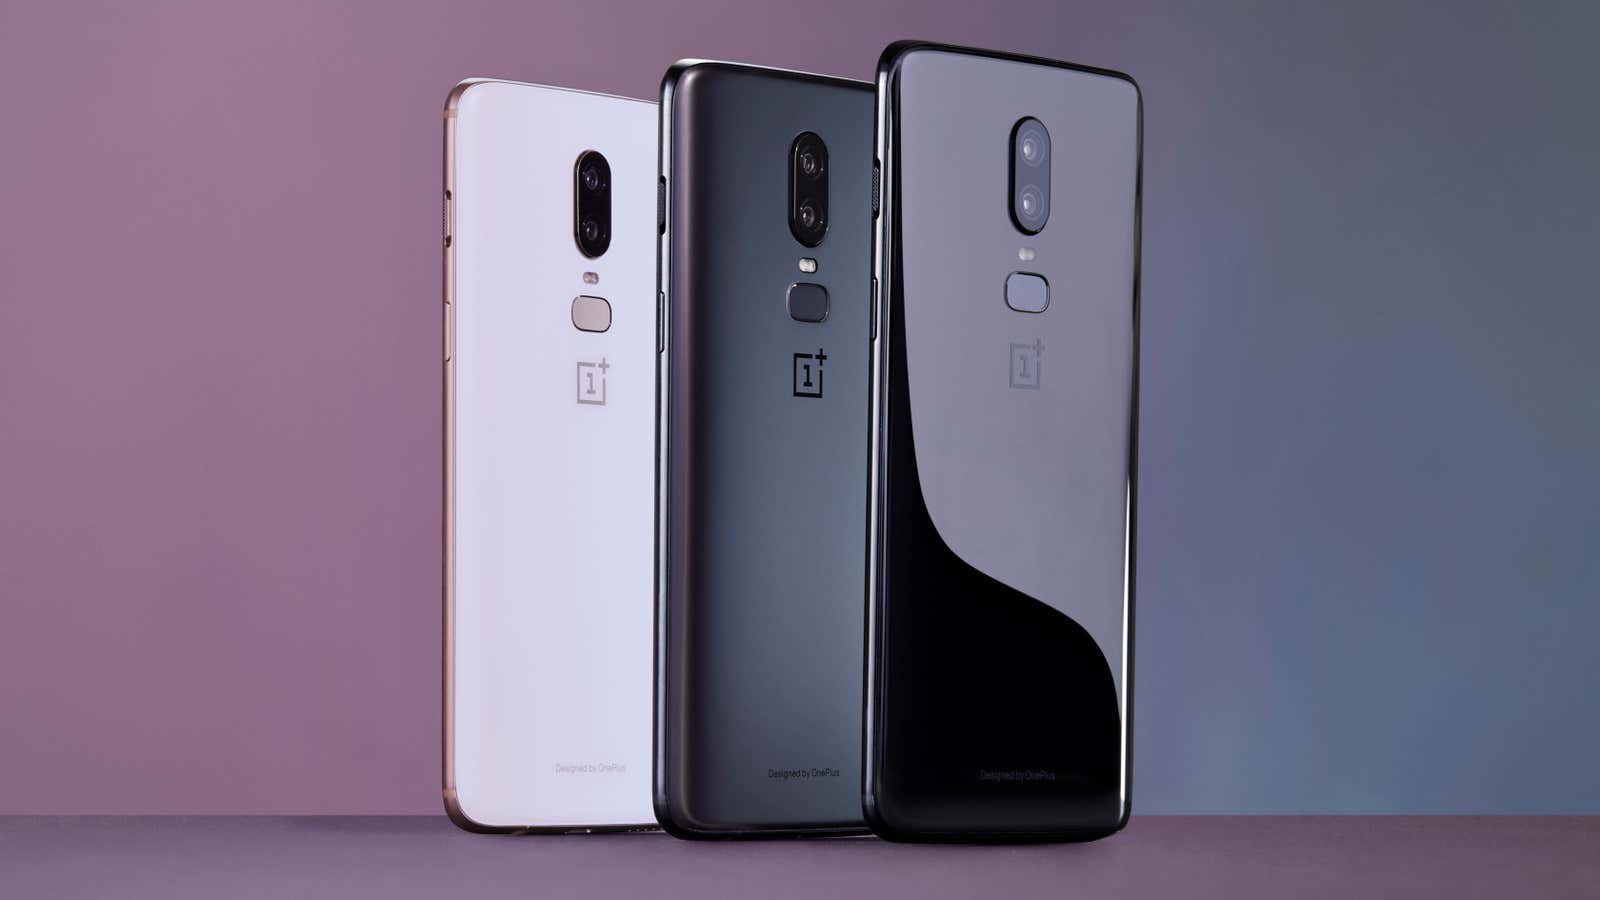 The OnePlus 6 is available in three finishes.